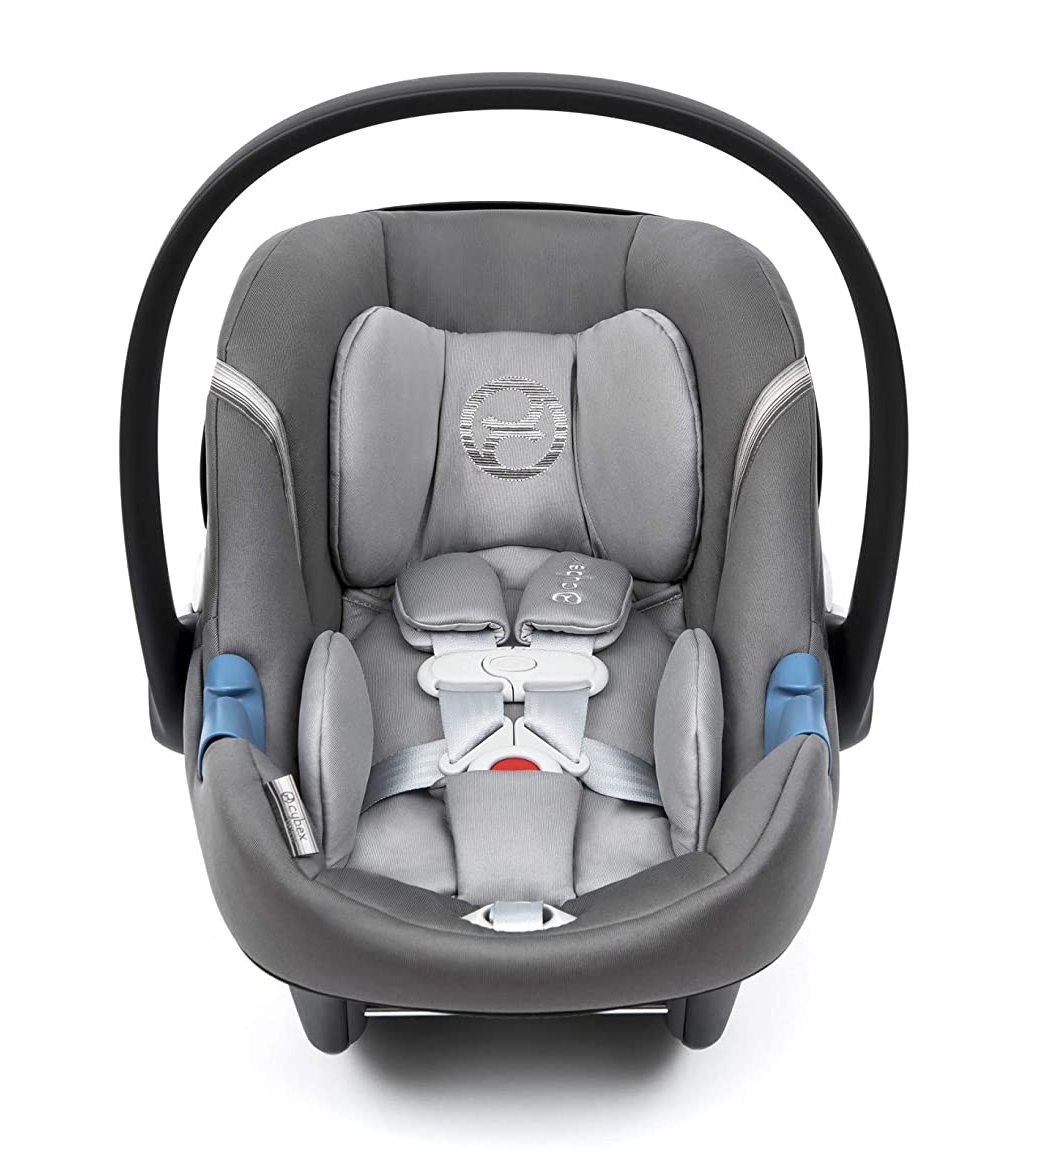 What features make the Cybex Aton M one of the safest infant carriers